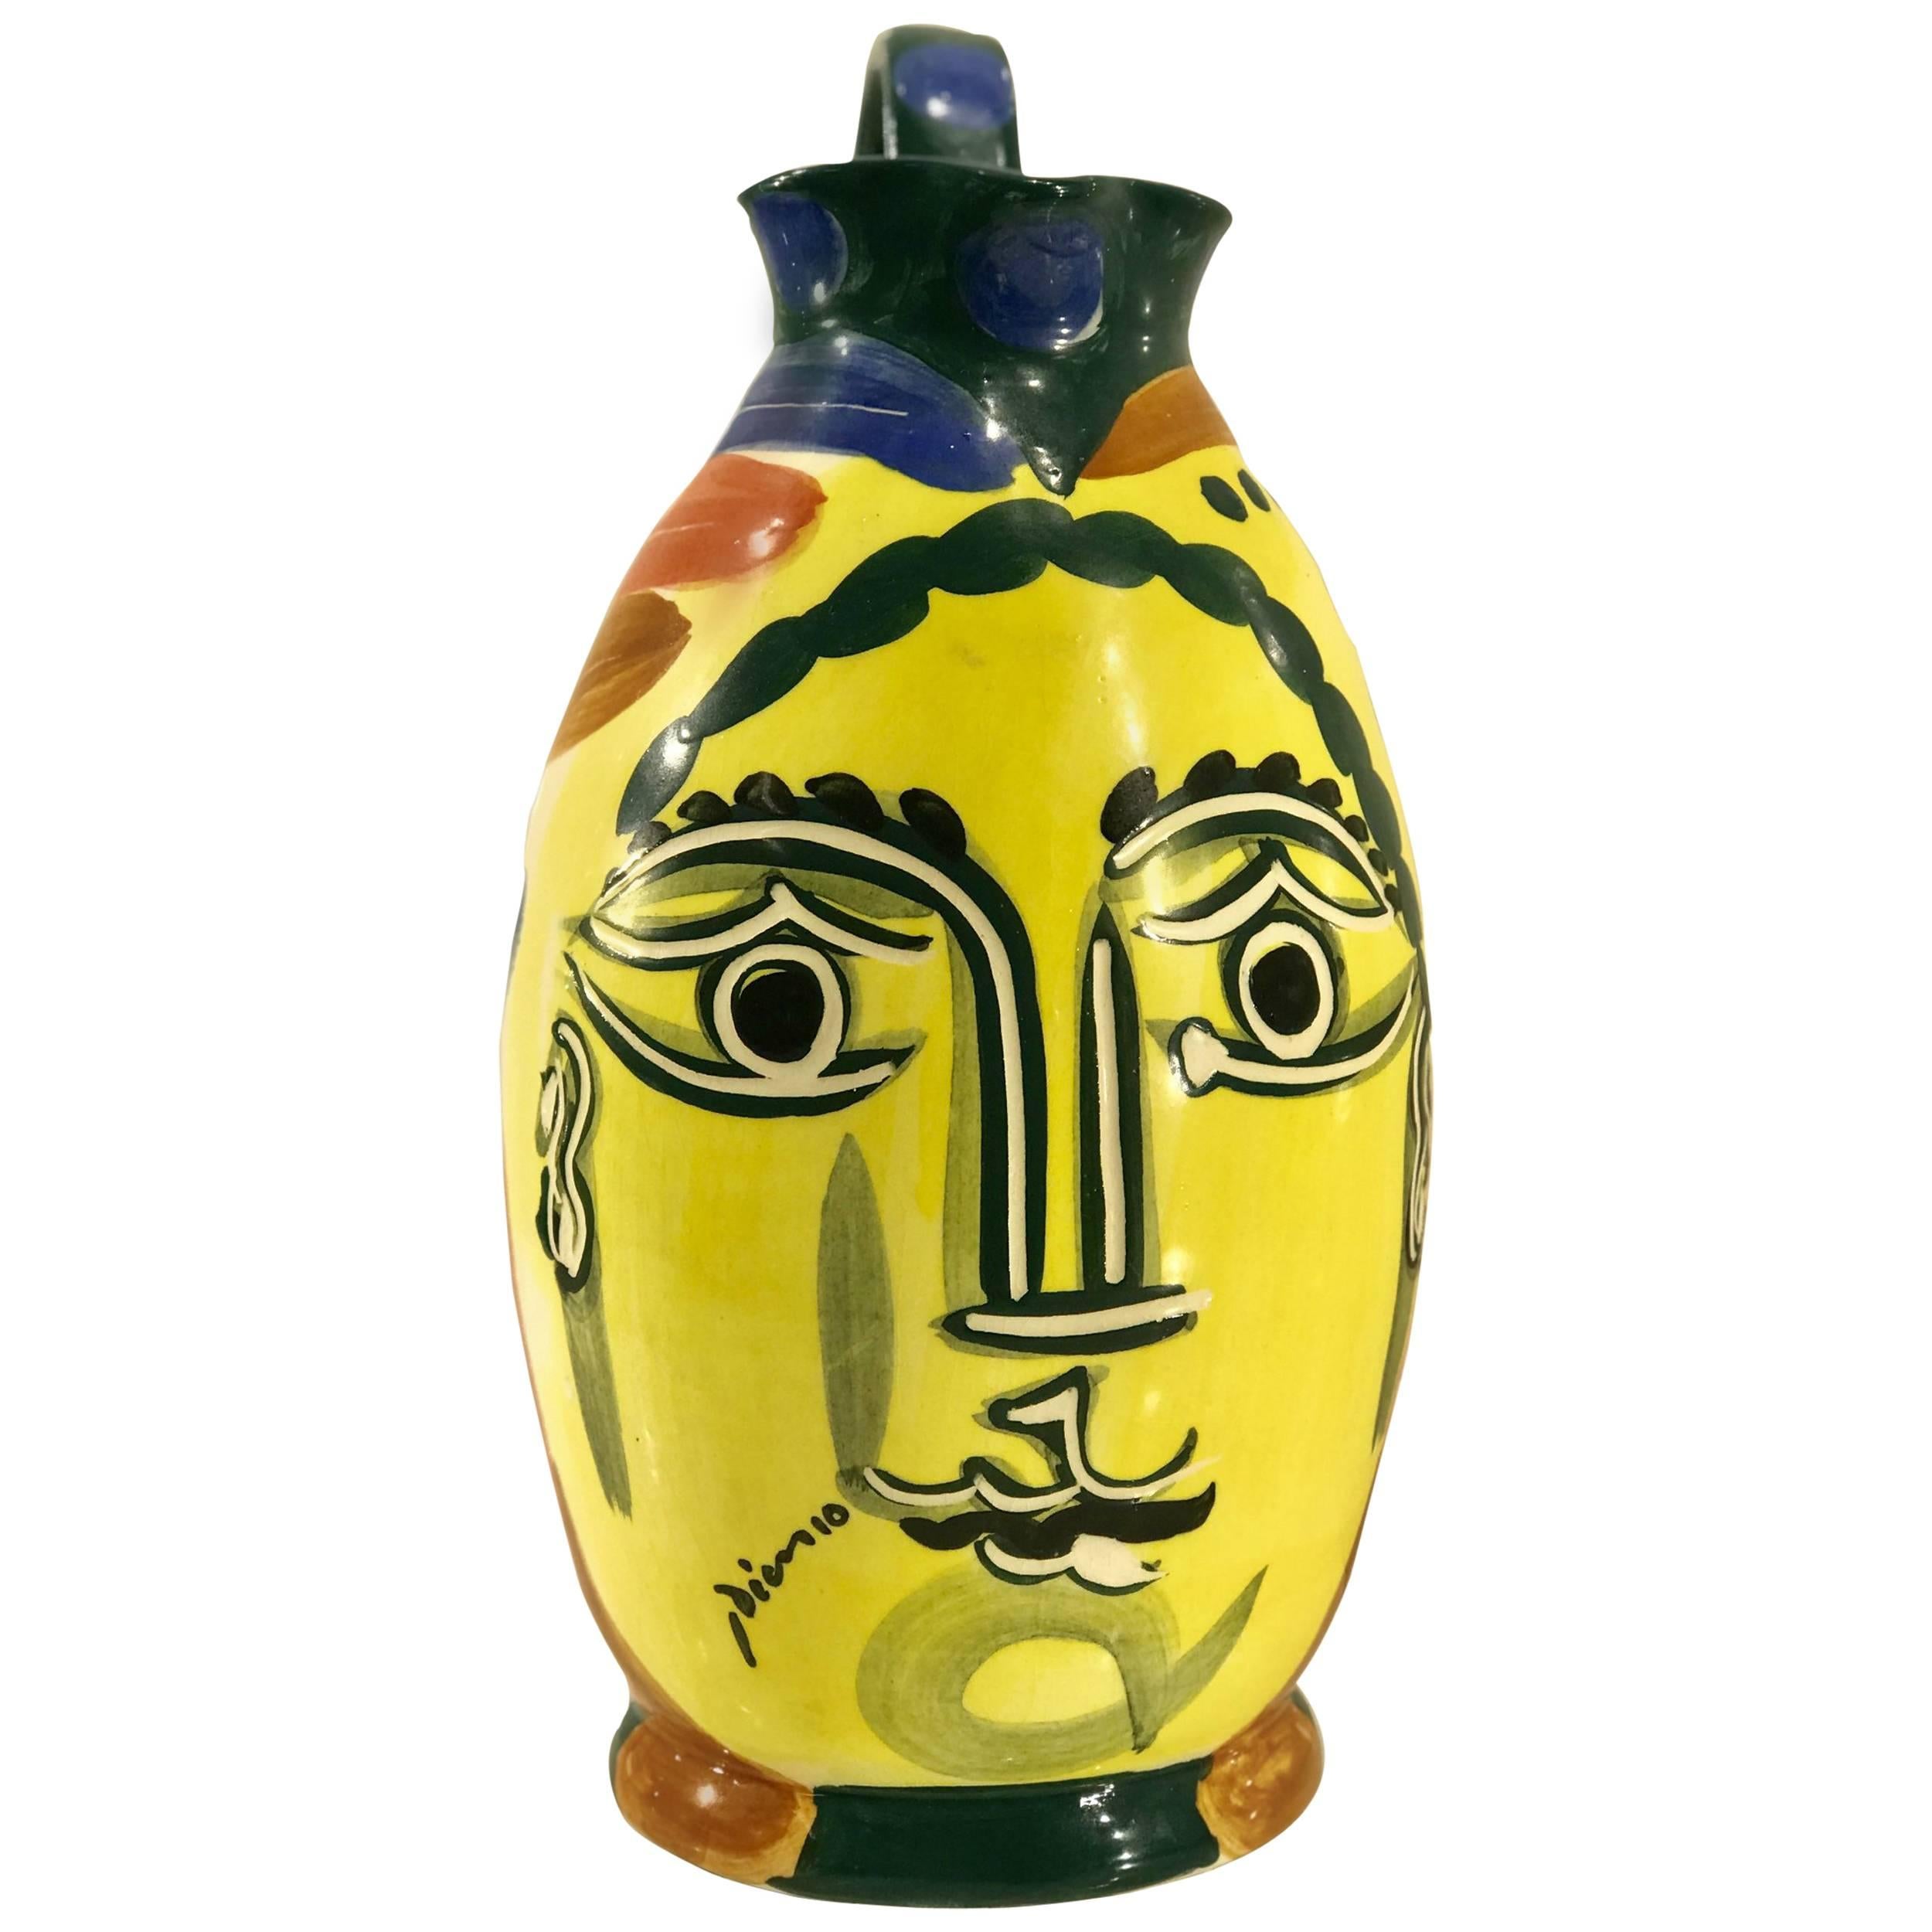 After Picasso 'Femme Du Barbu' Pottery Pitcher, Stamped Edition Picasso